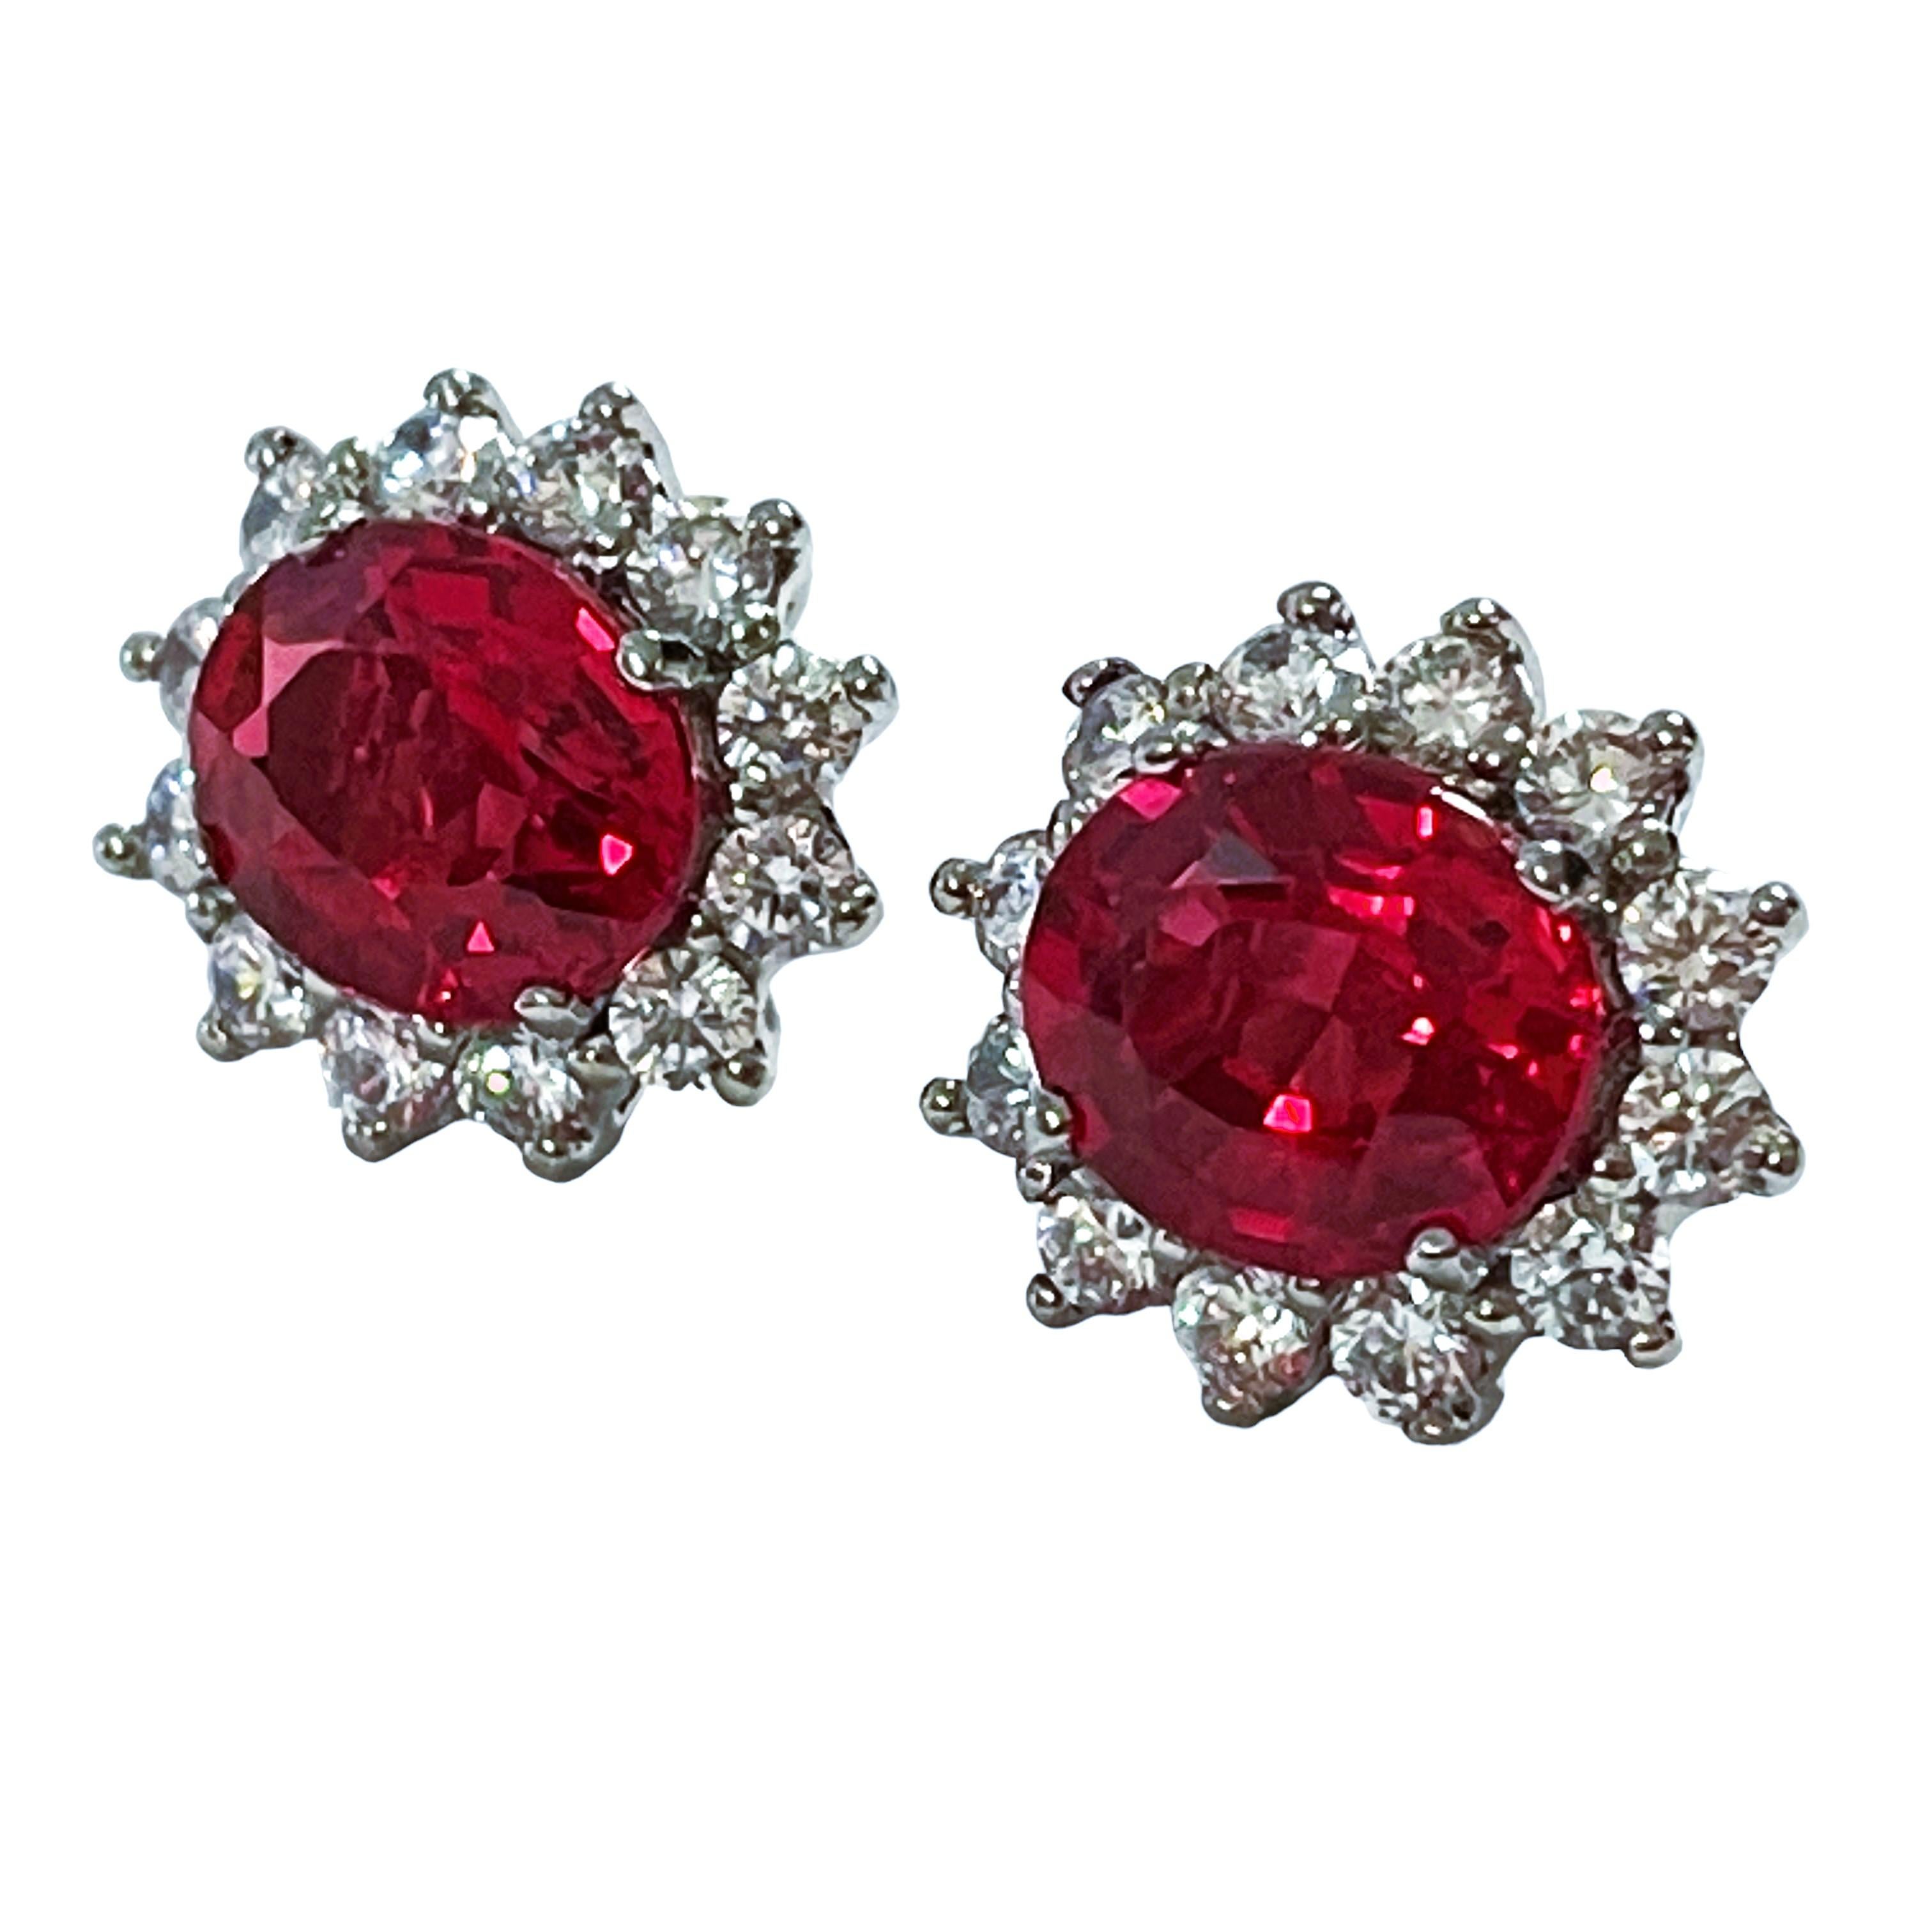 New African IF 12.7 Carat Padparadscha & White Sapphire Sterling Earrings 1